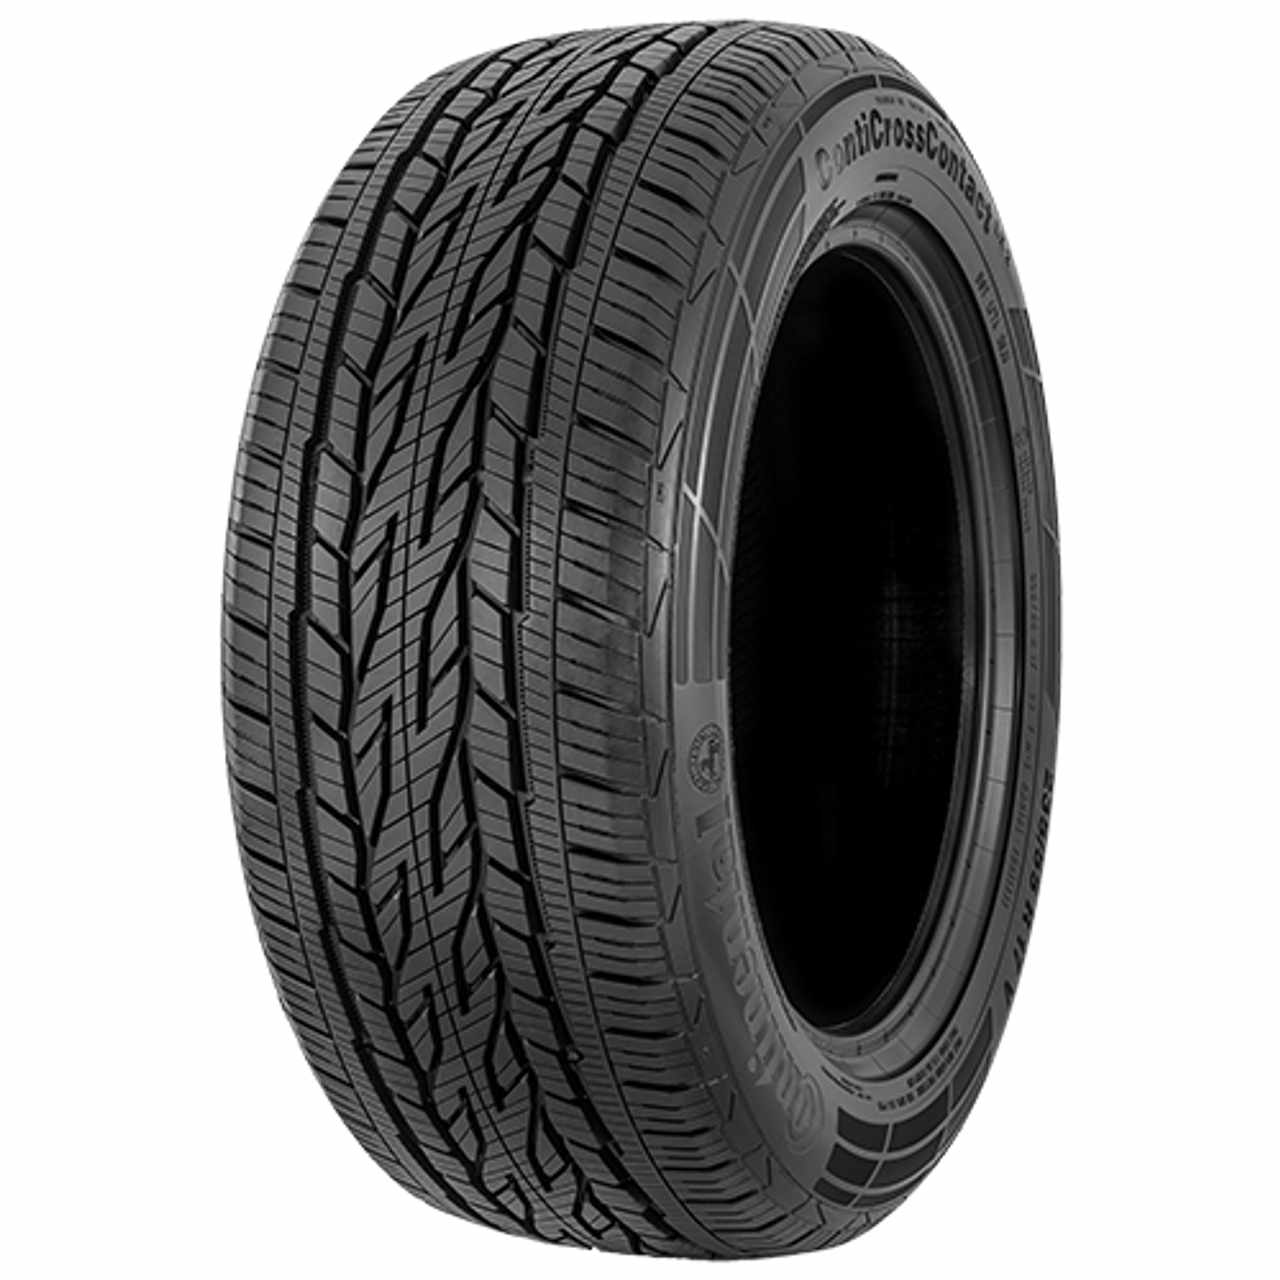 CONTINENTAL CONTICROSSCONTACT LX 2 (EVc) 225/55R18 98V FR BSW